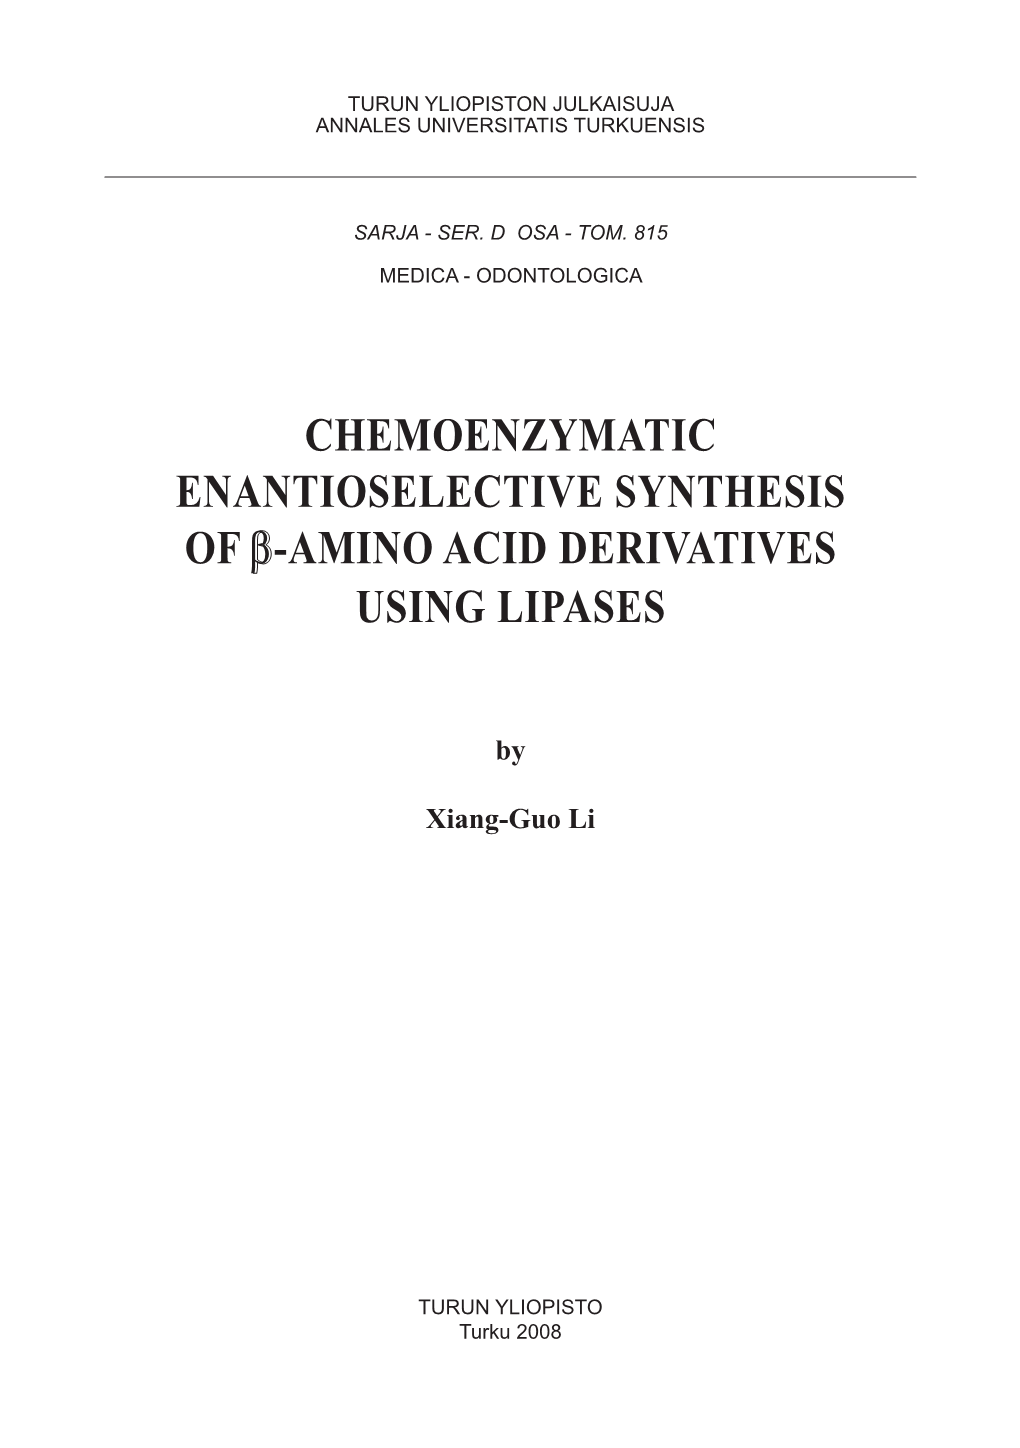 Chemoenzymatic Enantioselective Synthesis